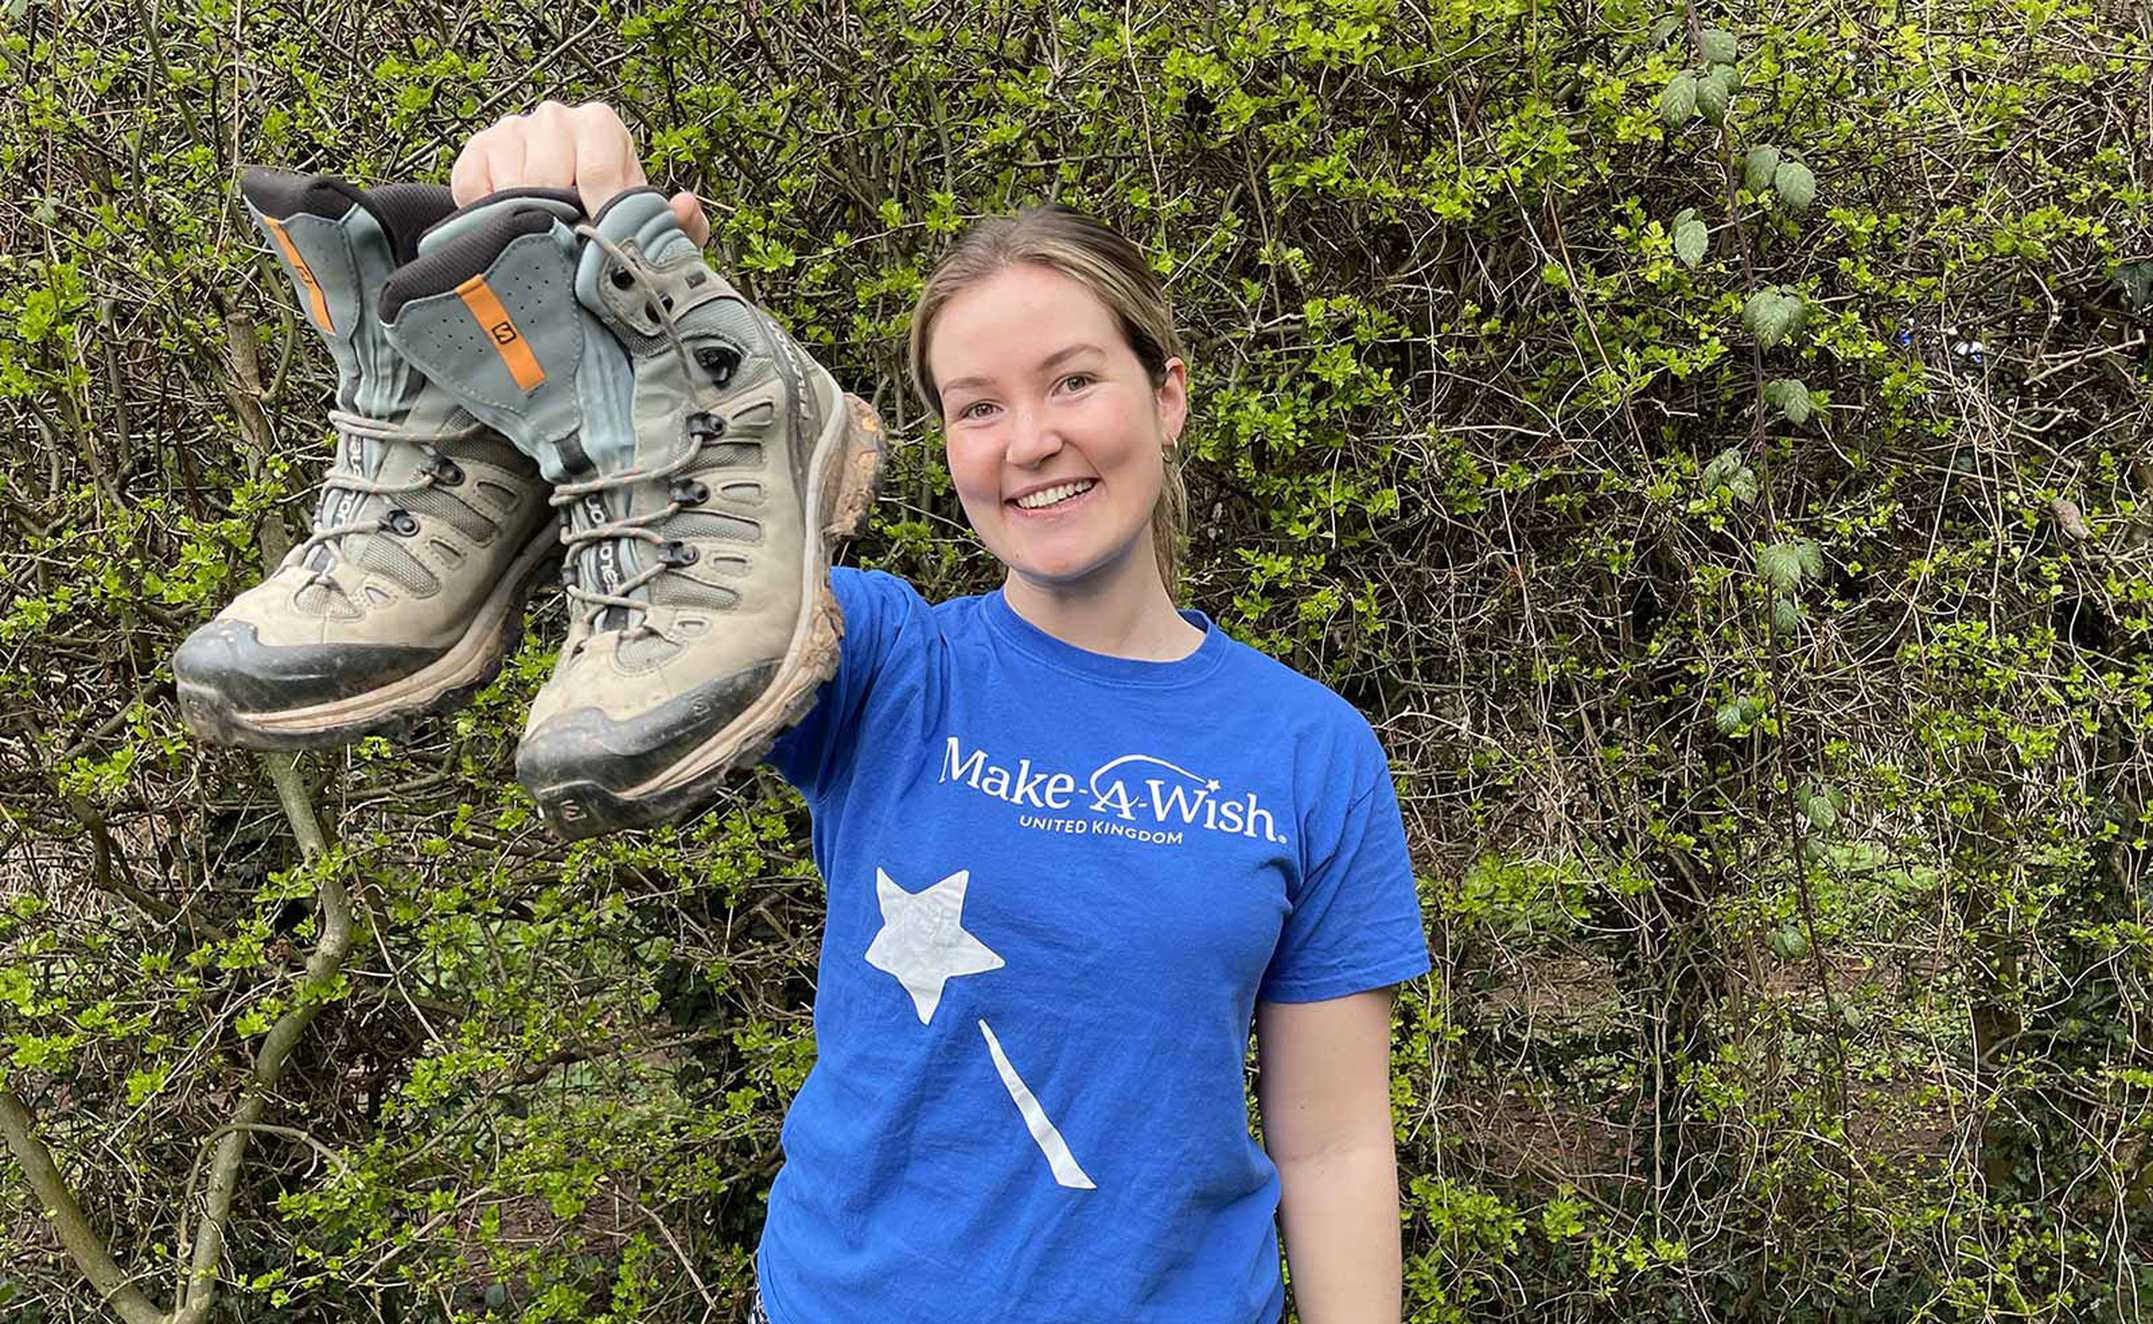 Team member, Callie wearing a blue Make-A-Wish t-shirt and holding up a pair of hiking boots.